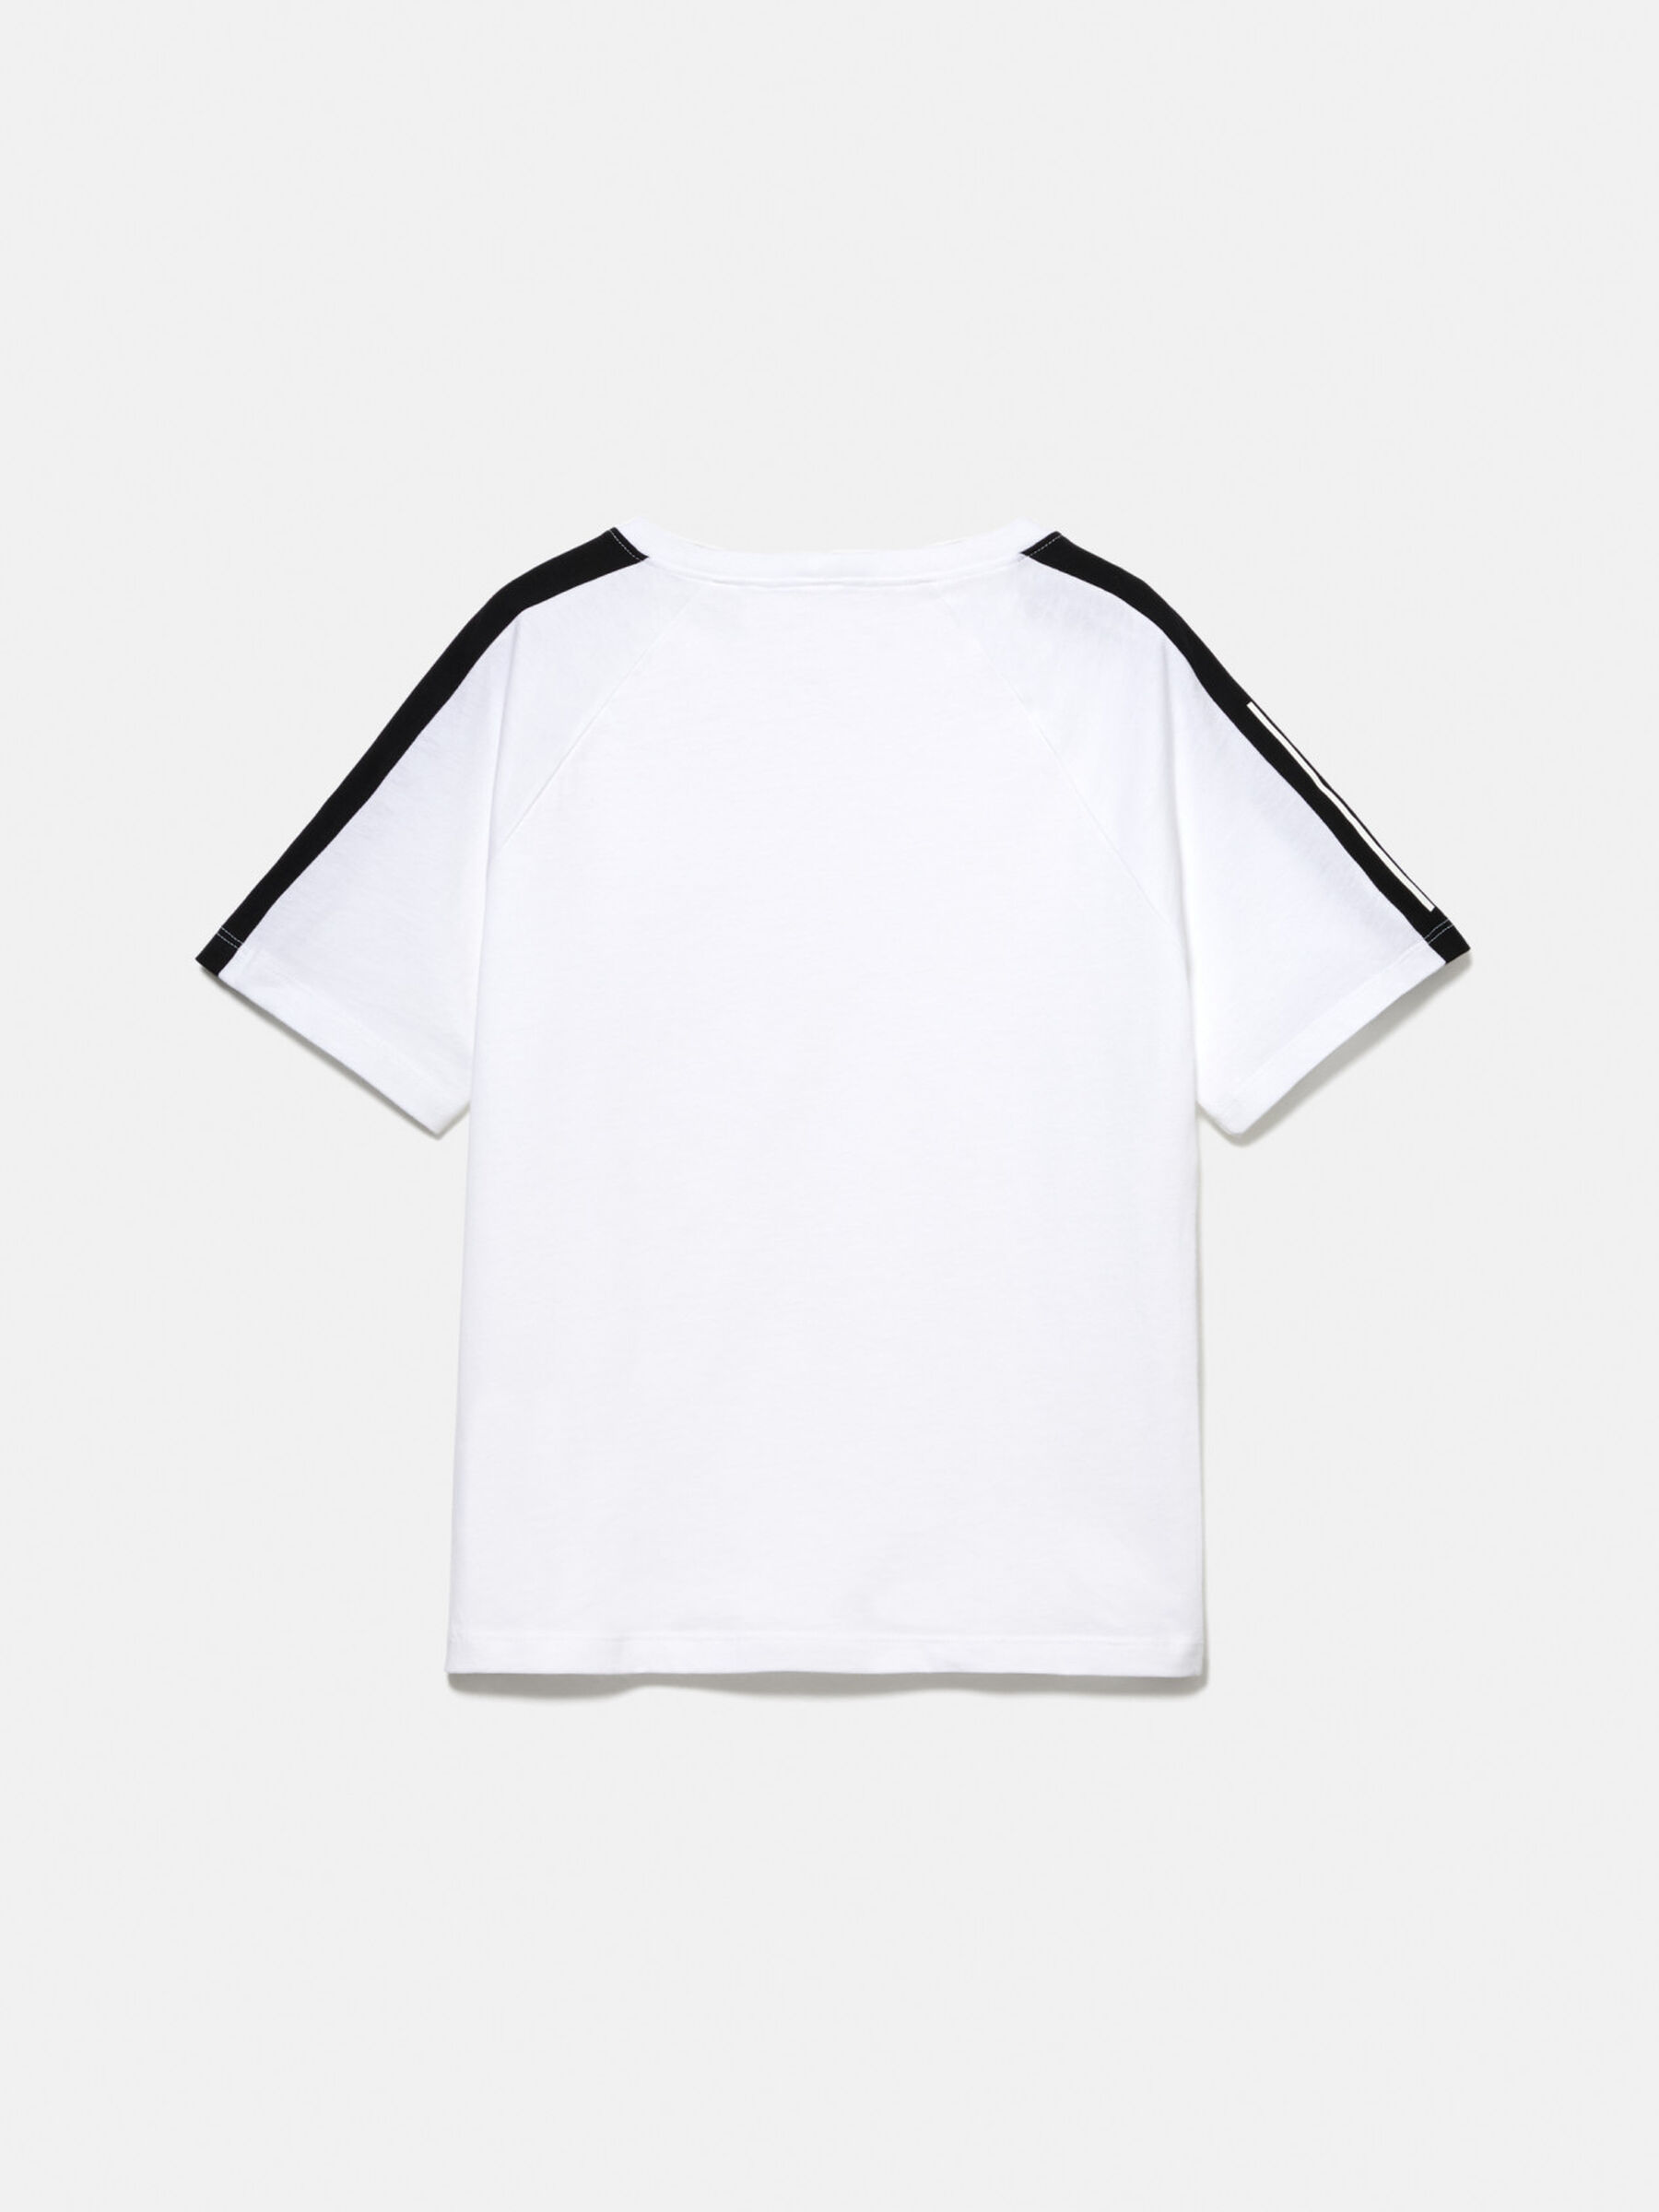 T-shirt - Sisley and with White bands logo,